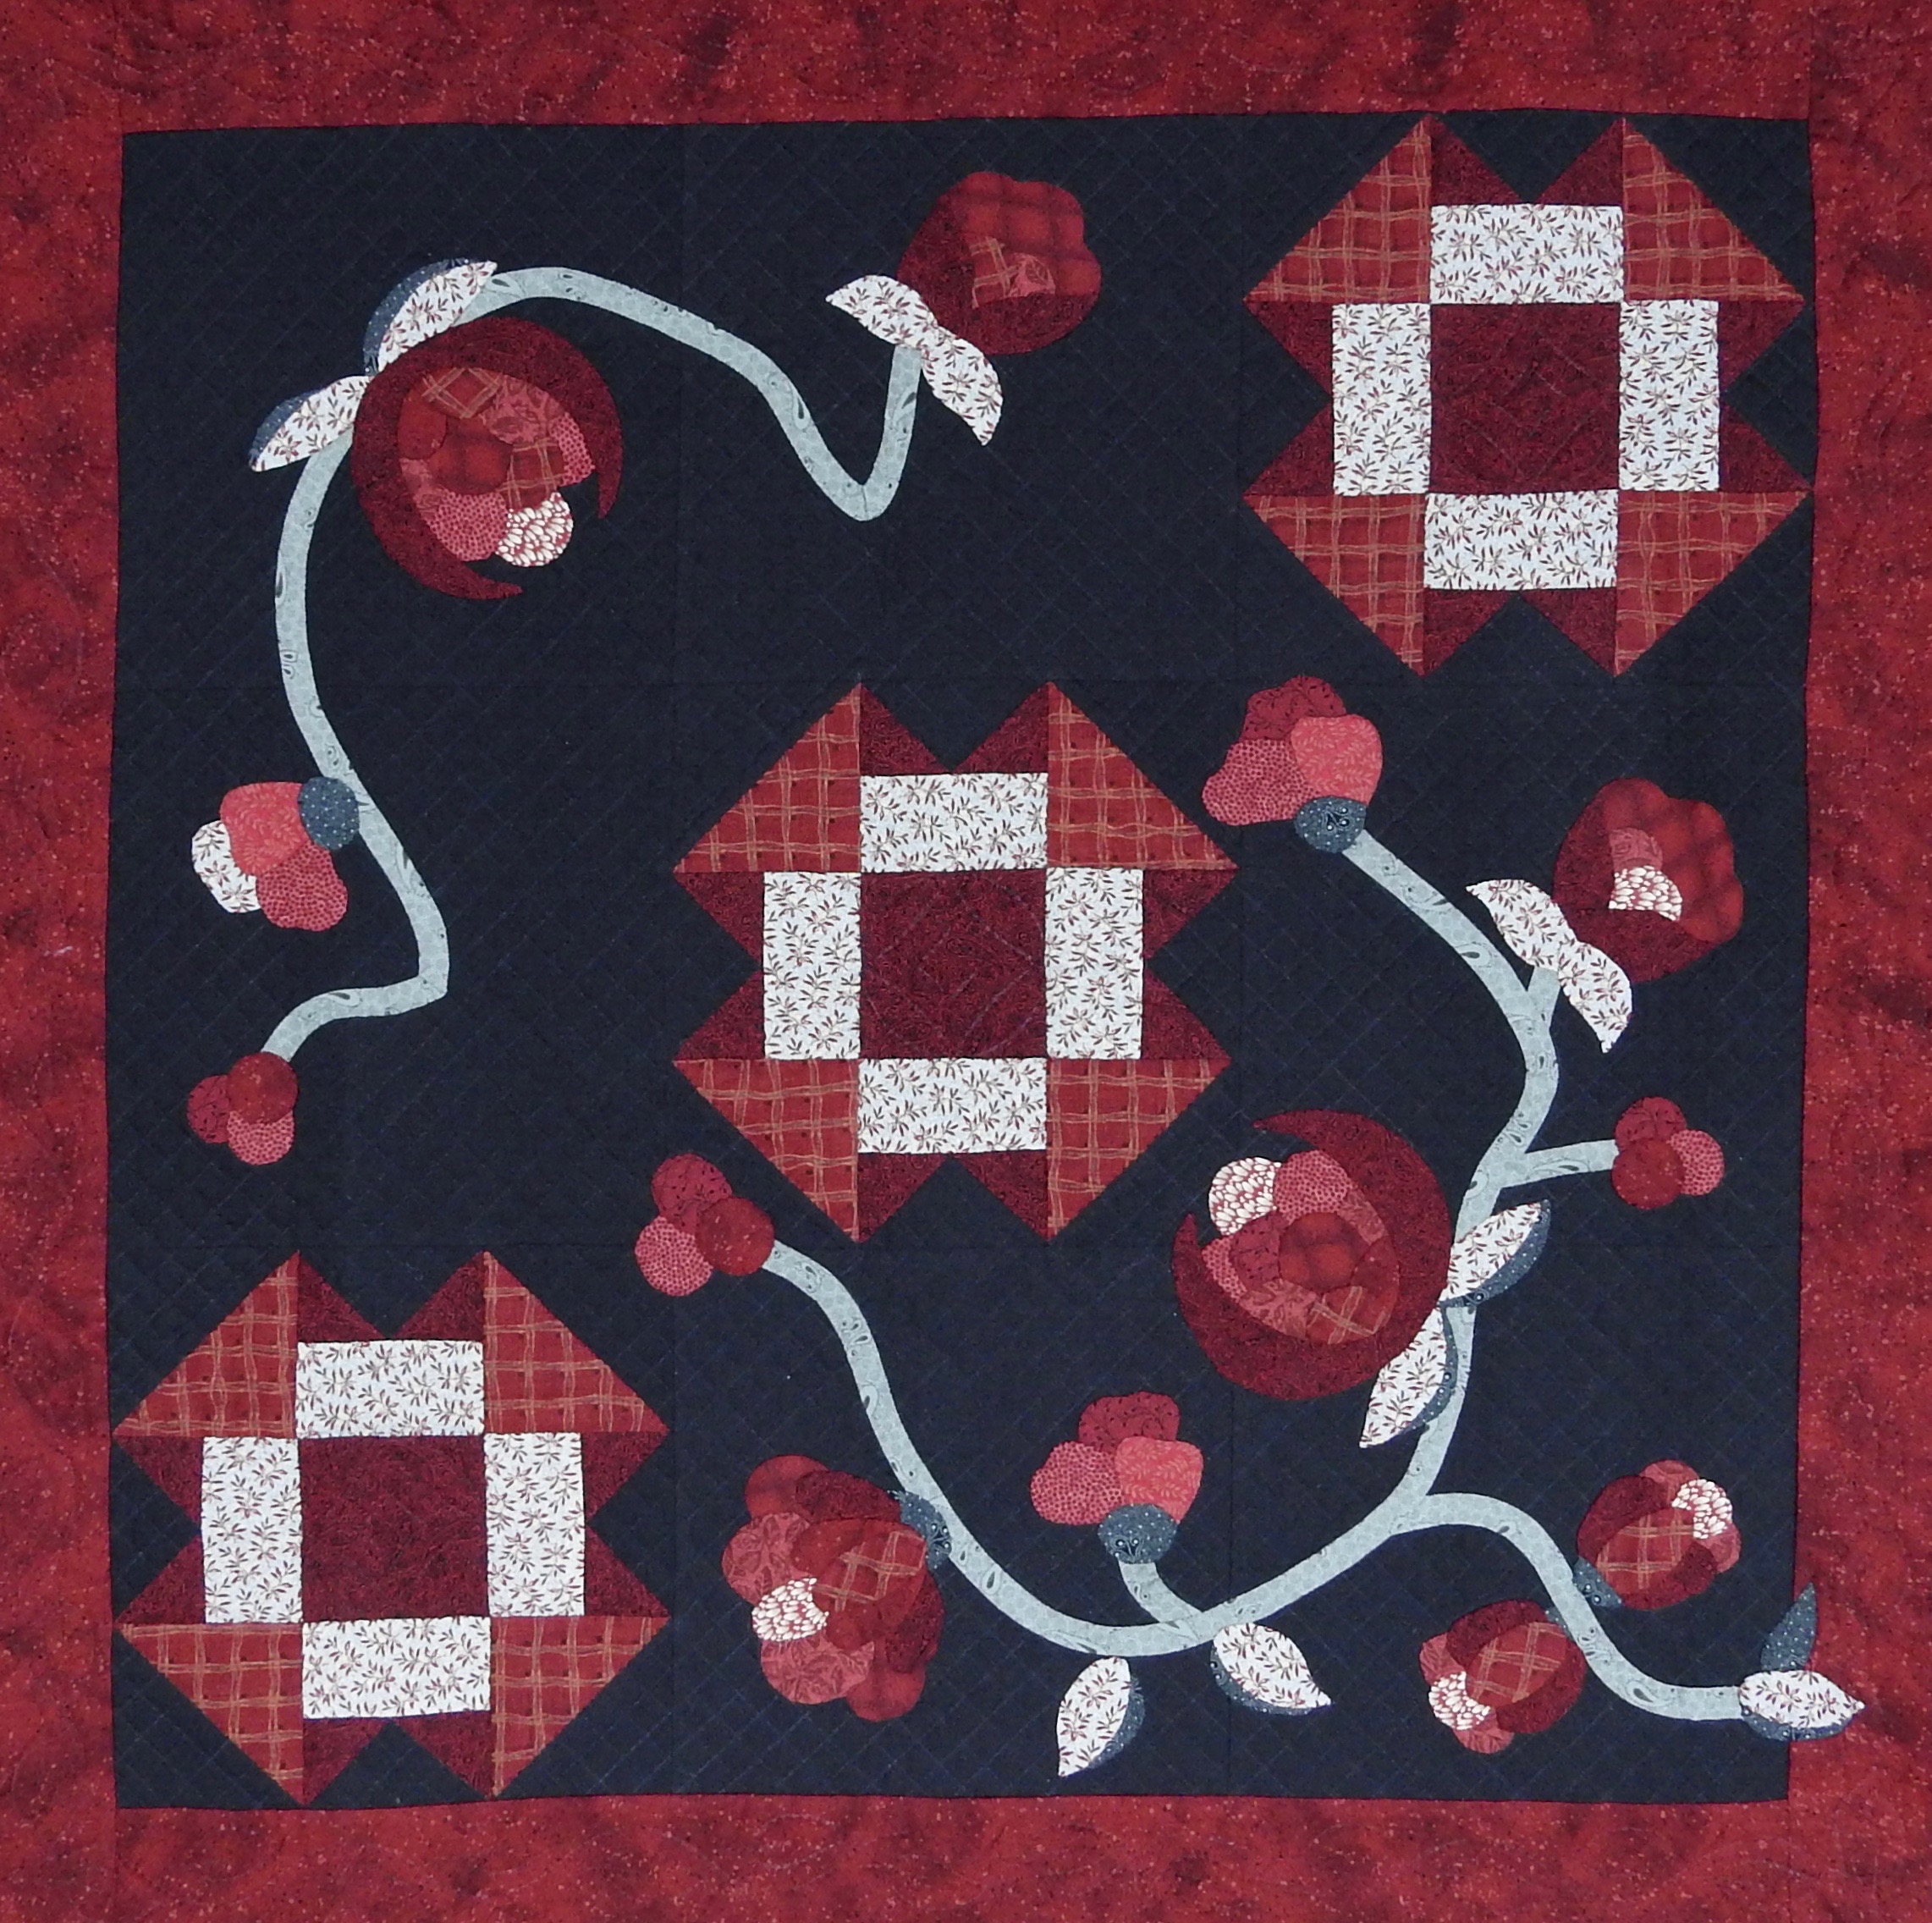 Yours Truly, Designed &amp; Pieced by Helen Glick, Appliquéd &amp; Quilted by Elaine Frey, donated by Elaine Frey &amp; Helen Glick, 31 x 31”